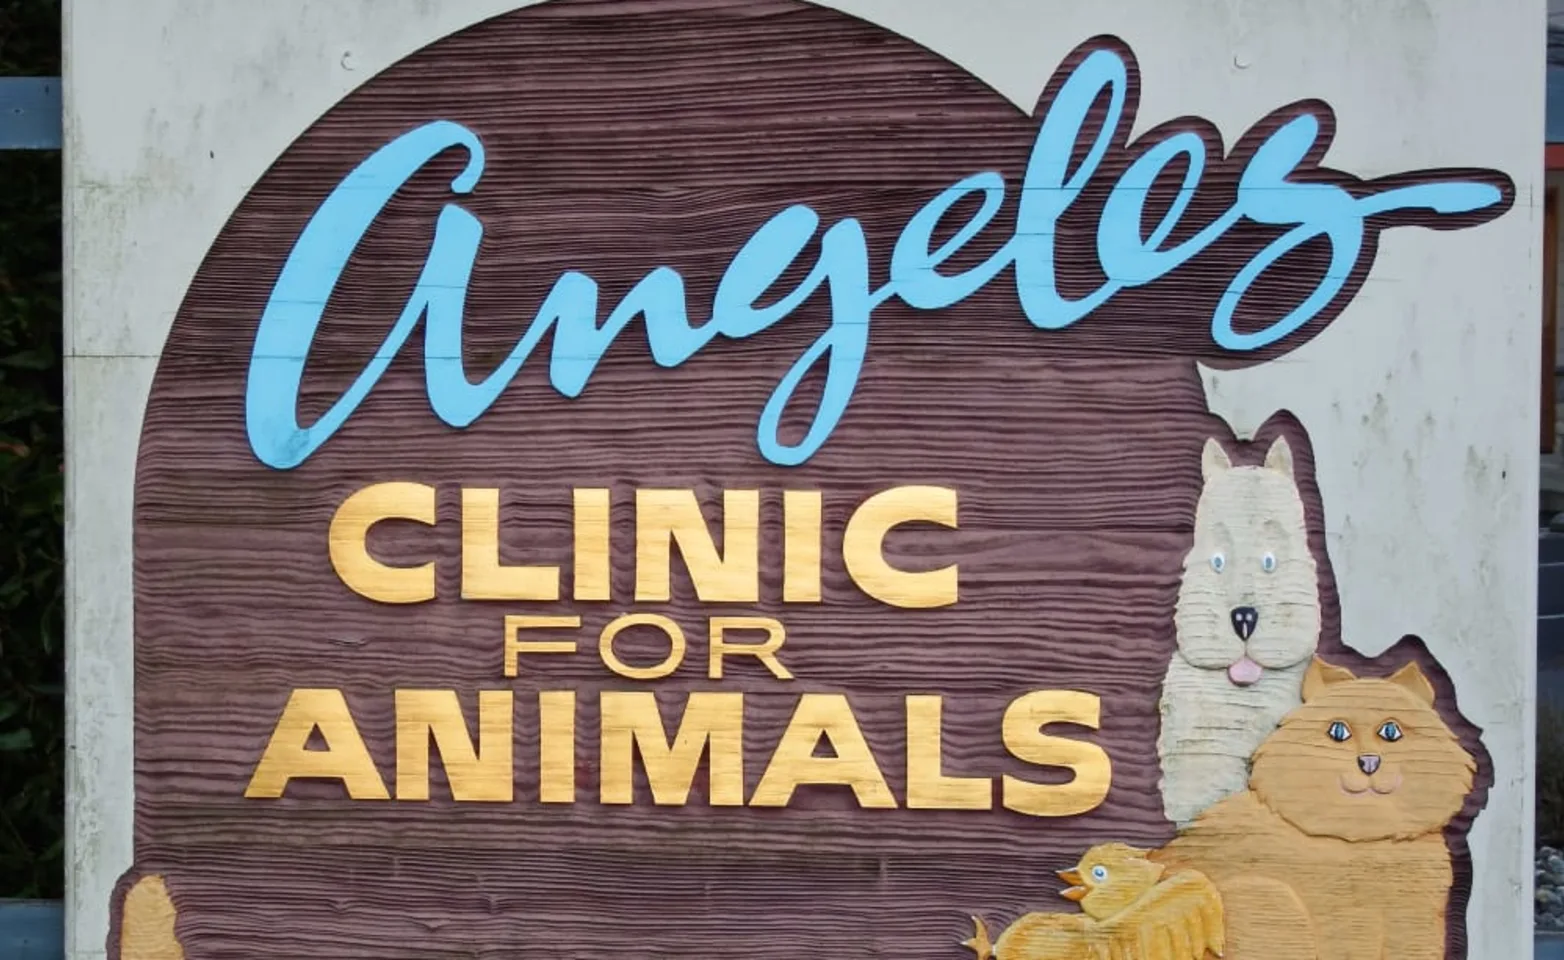 Angeles Clinic for Animals Sign